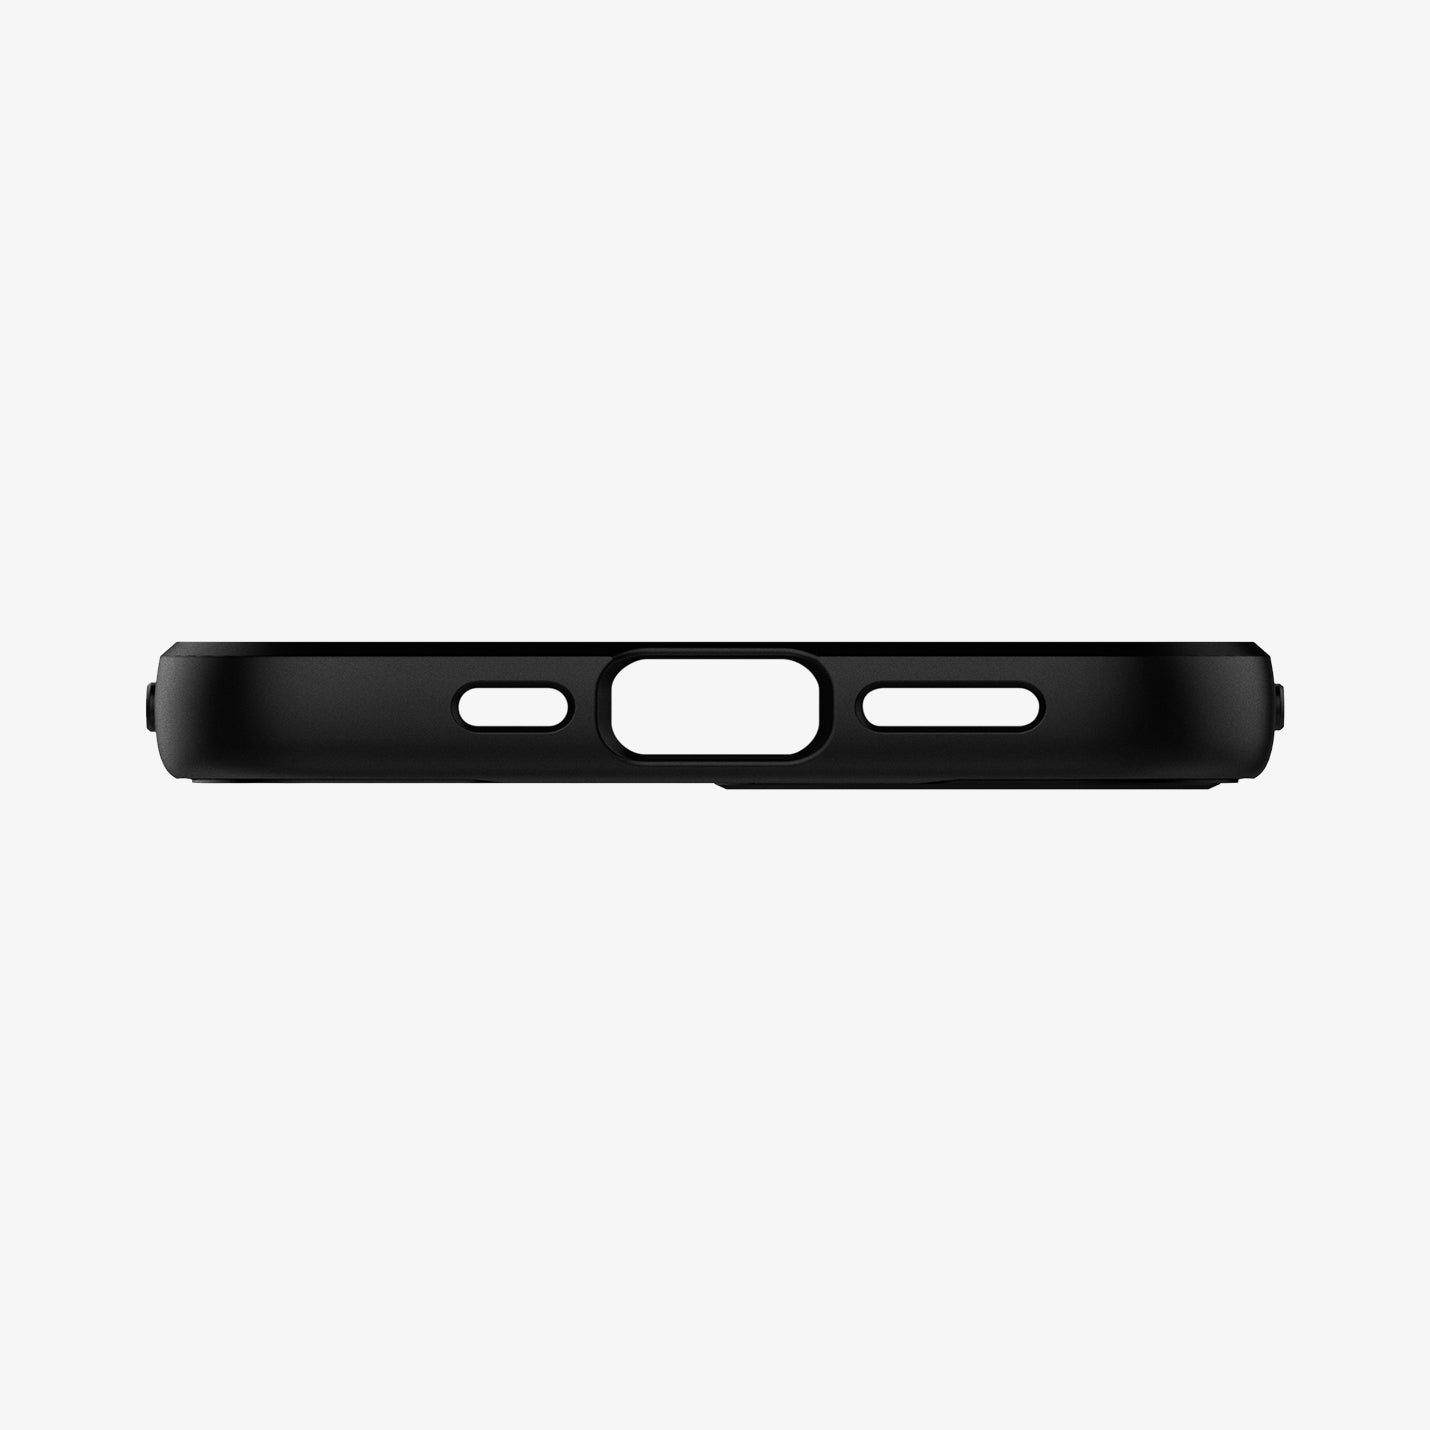 ACS01515 - iPhone 12 / iPhone 12 Pro Case Core Armor in matte black showing the bottom with precise cutouts